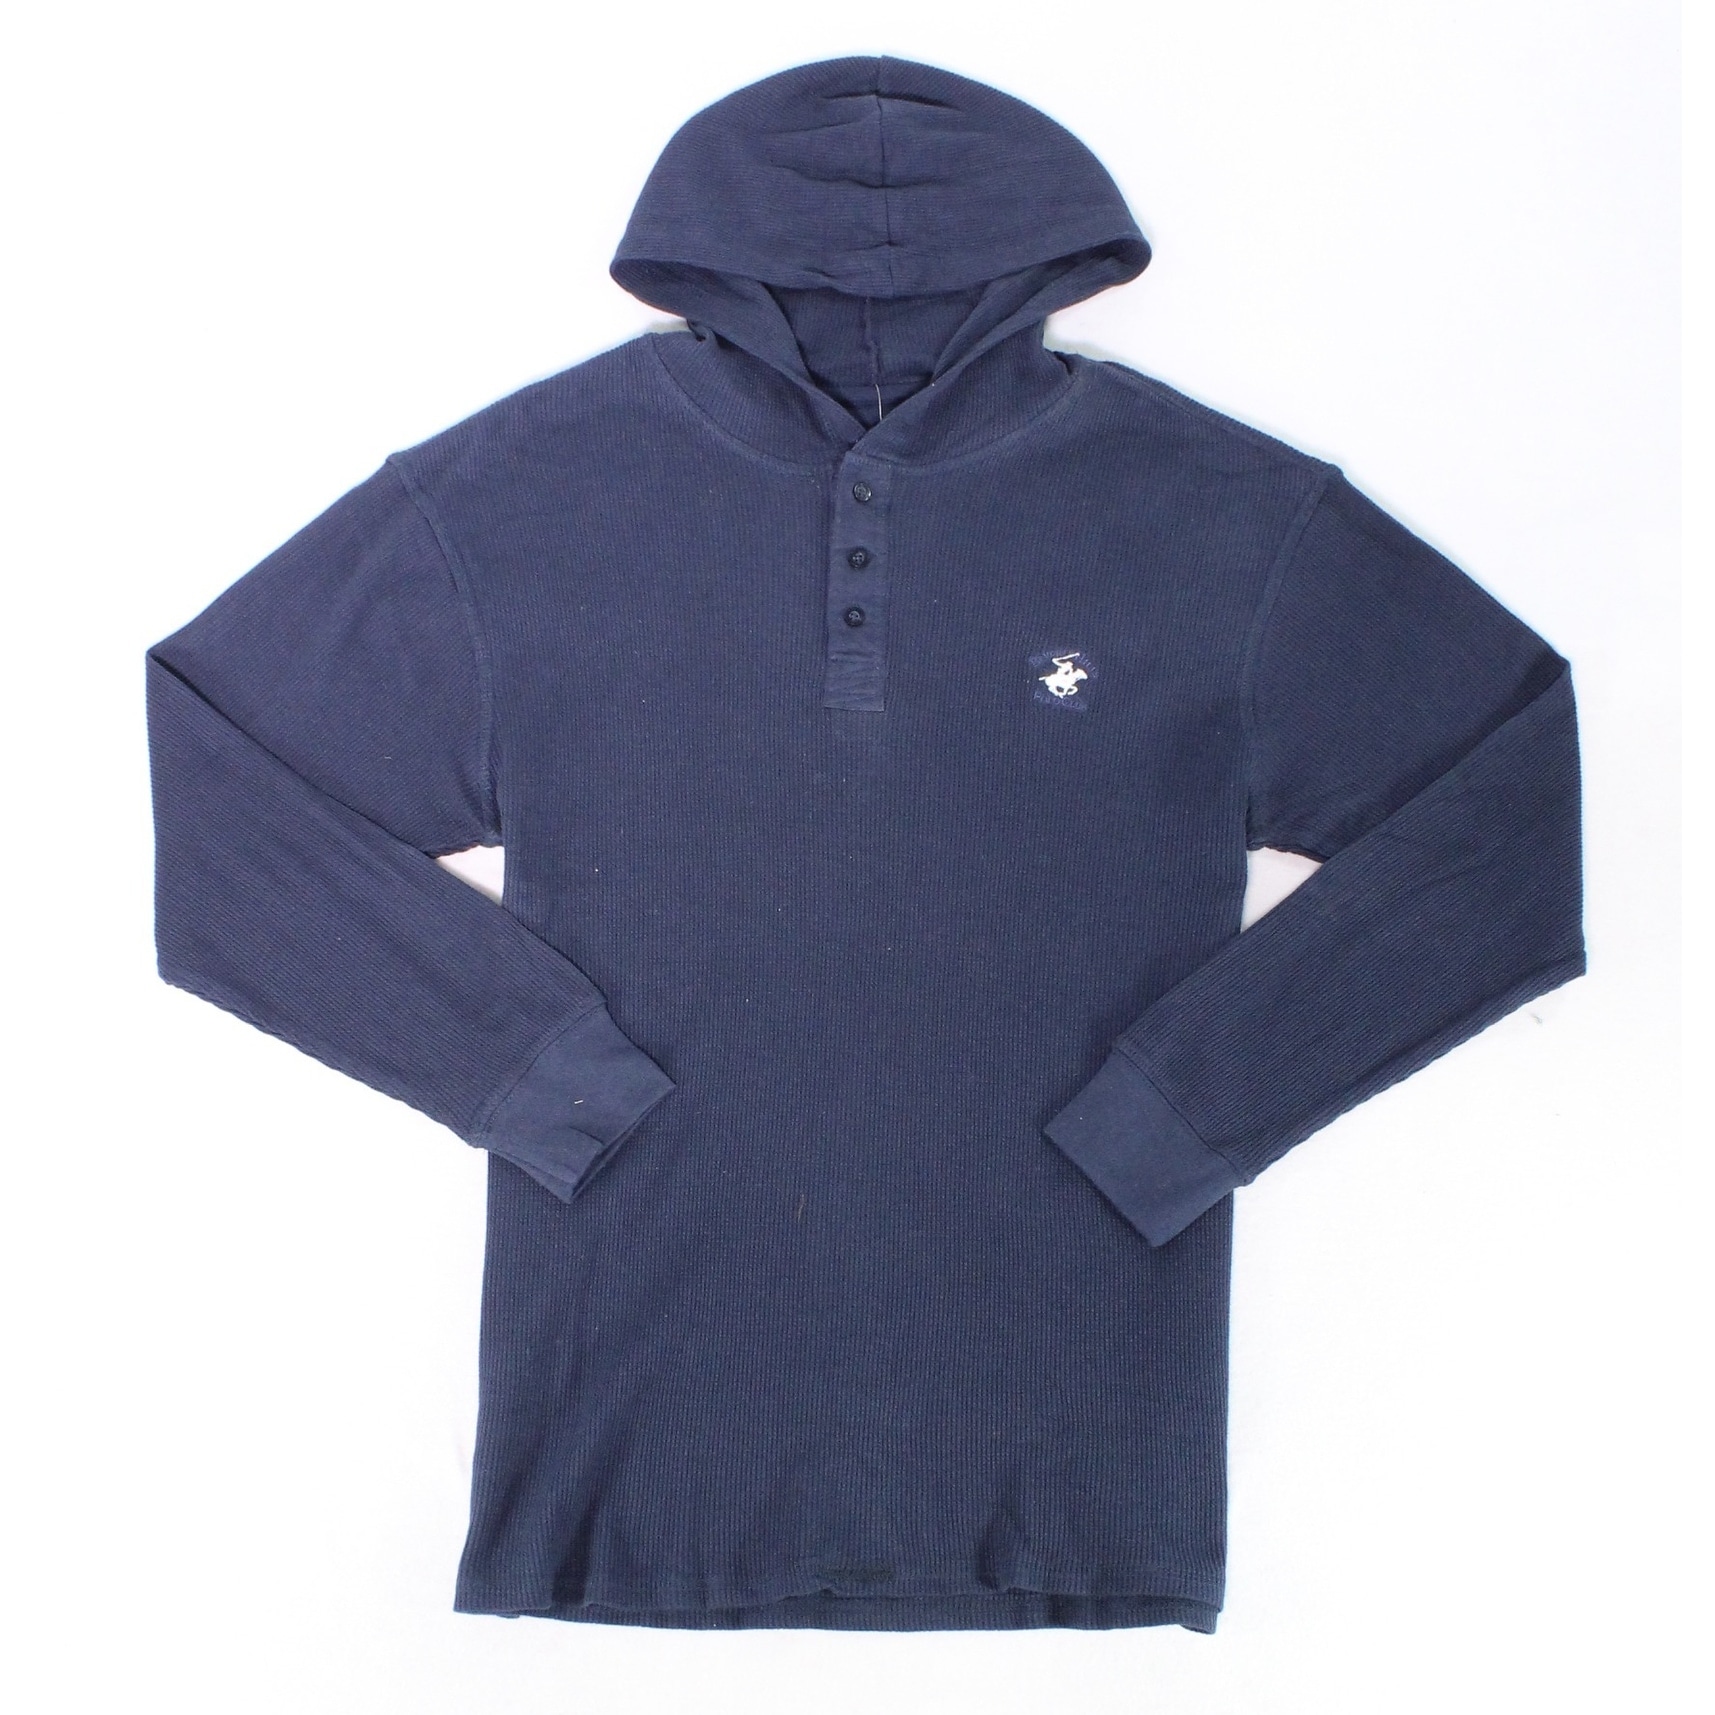 beverly hills polo club jacket prices